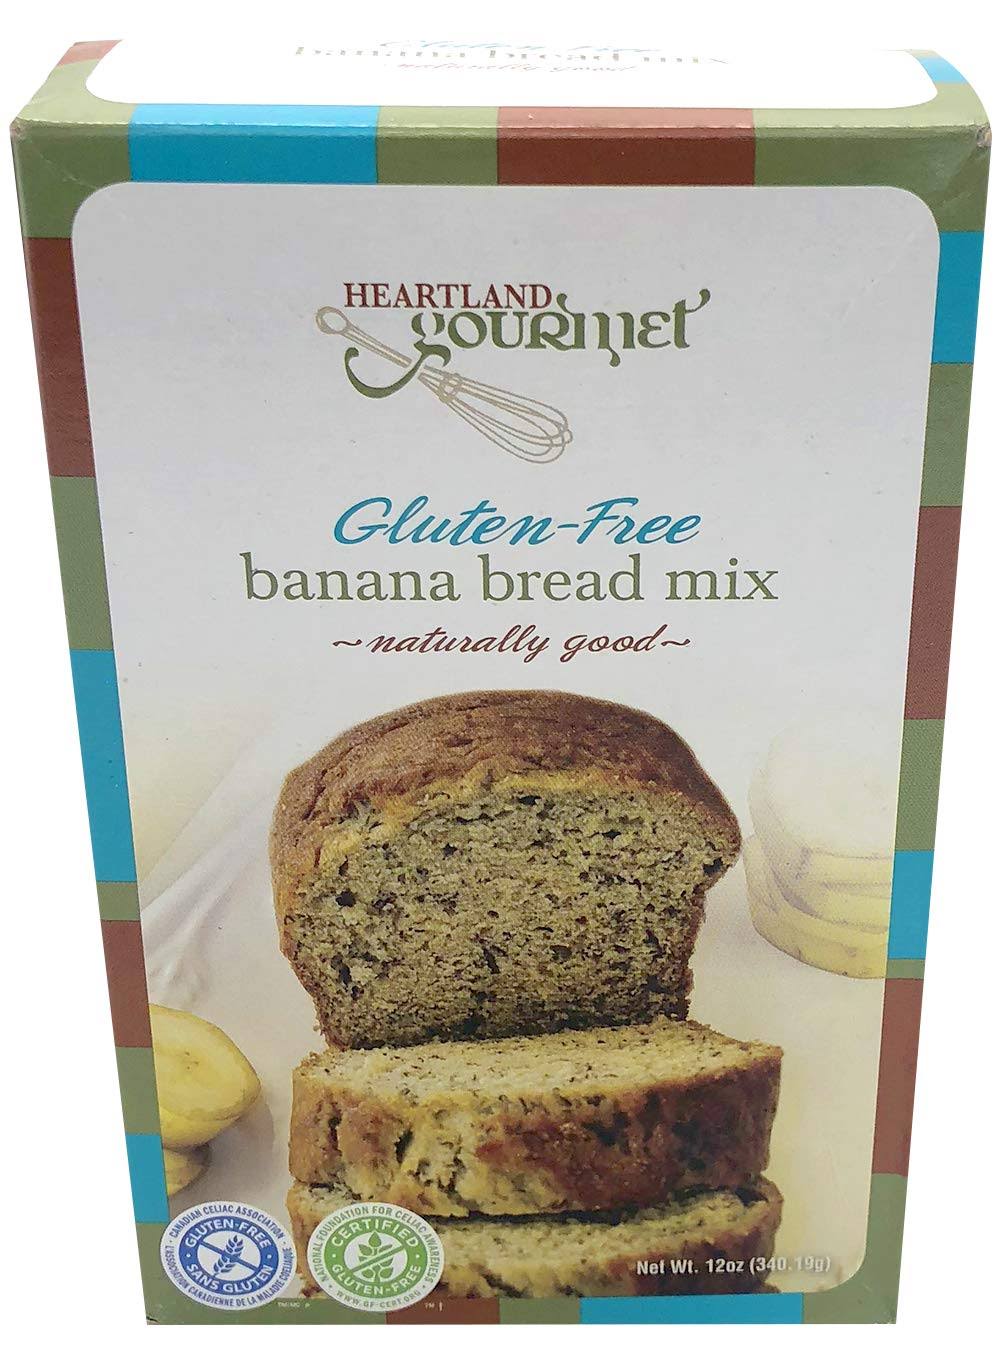 Heartland Gourmet Gluten Free Banana Bread Mix - Soft and Moist - Certified Gluten Free - High Quality Ingredients - All Purpose - Safe for Celiac